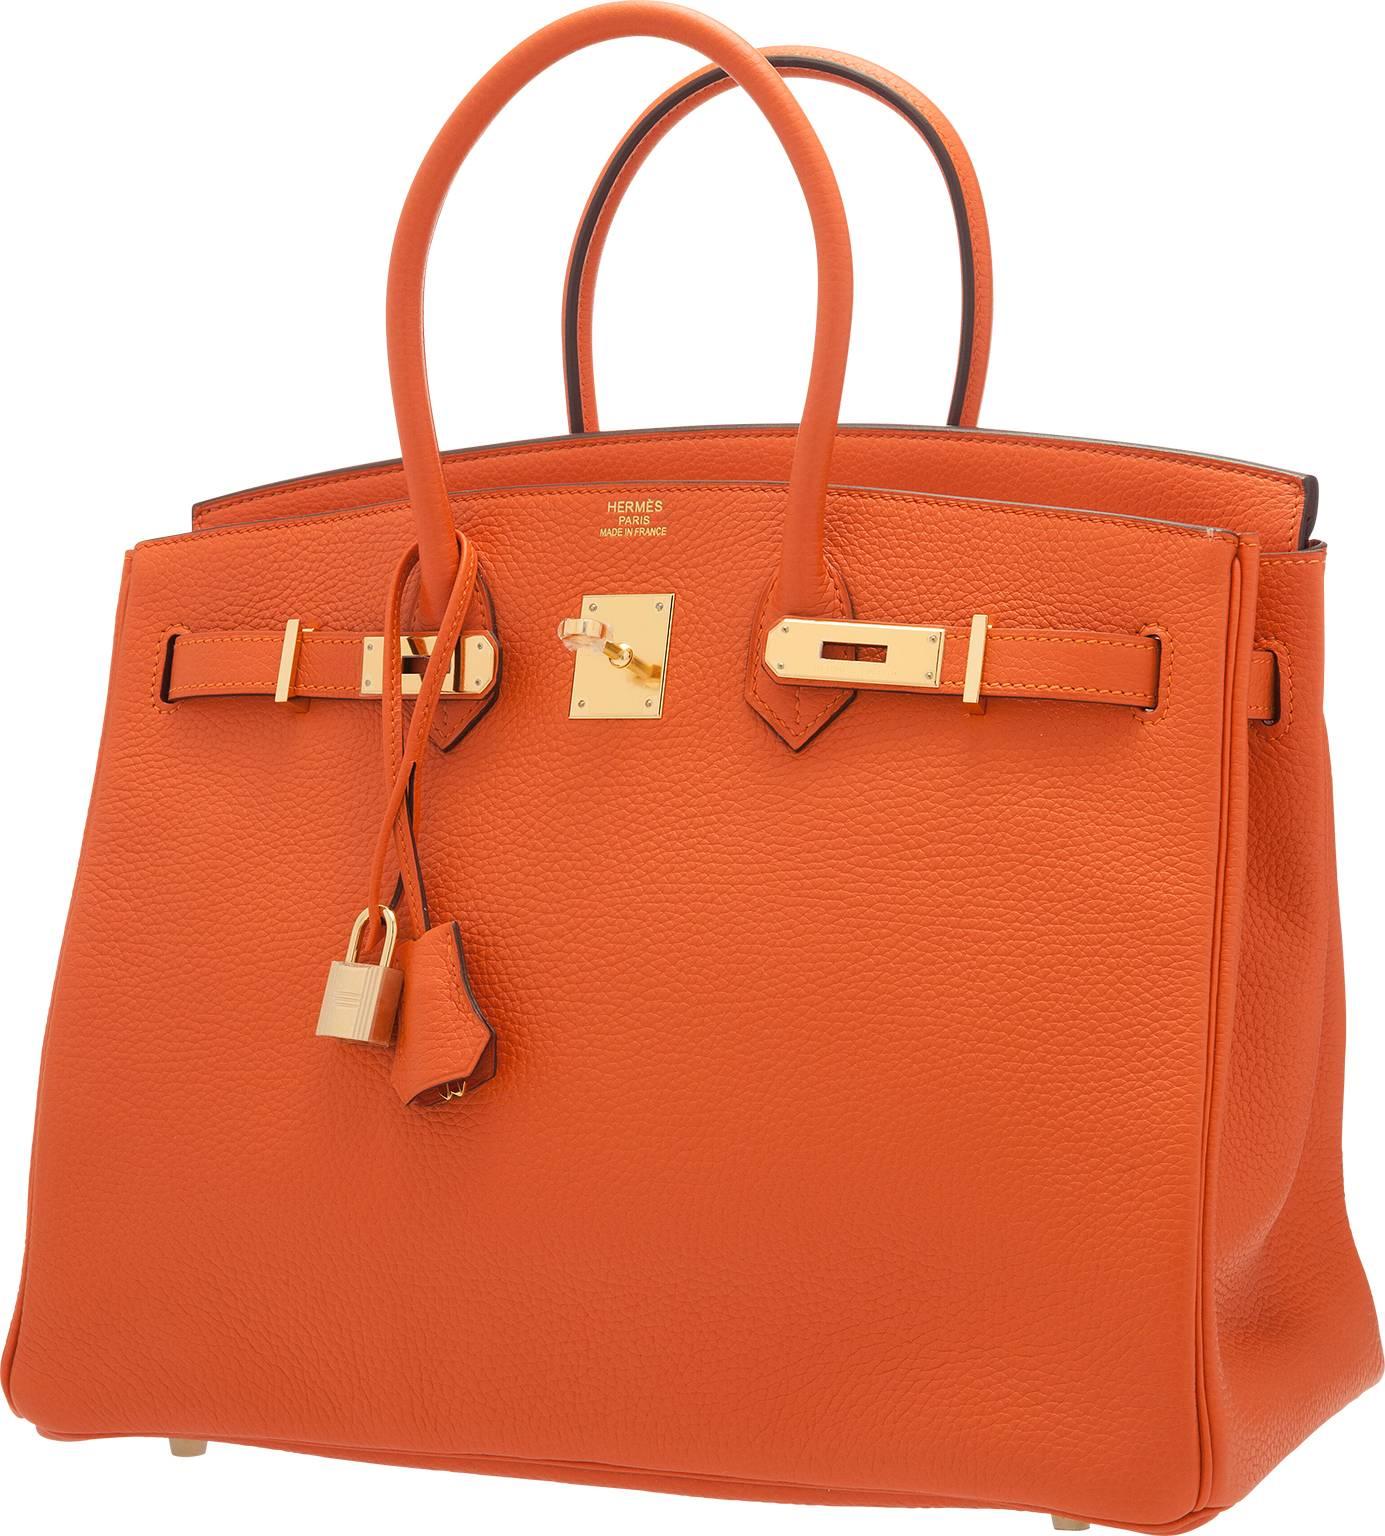 The Birkin bag is one of the most recognizable and sought after handbags in the world. This particular Feu Clemence Leather Birkin will add a wonderful pop of color to your wardrobe. This bag features two leather handles, lock, keys, and clochette.